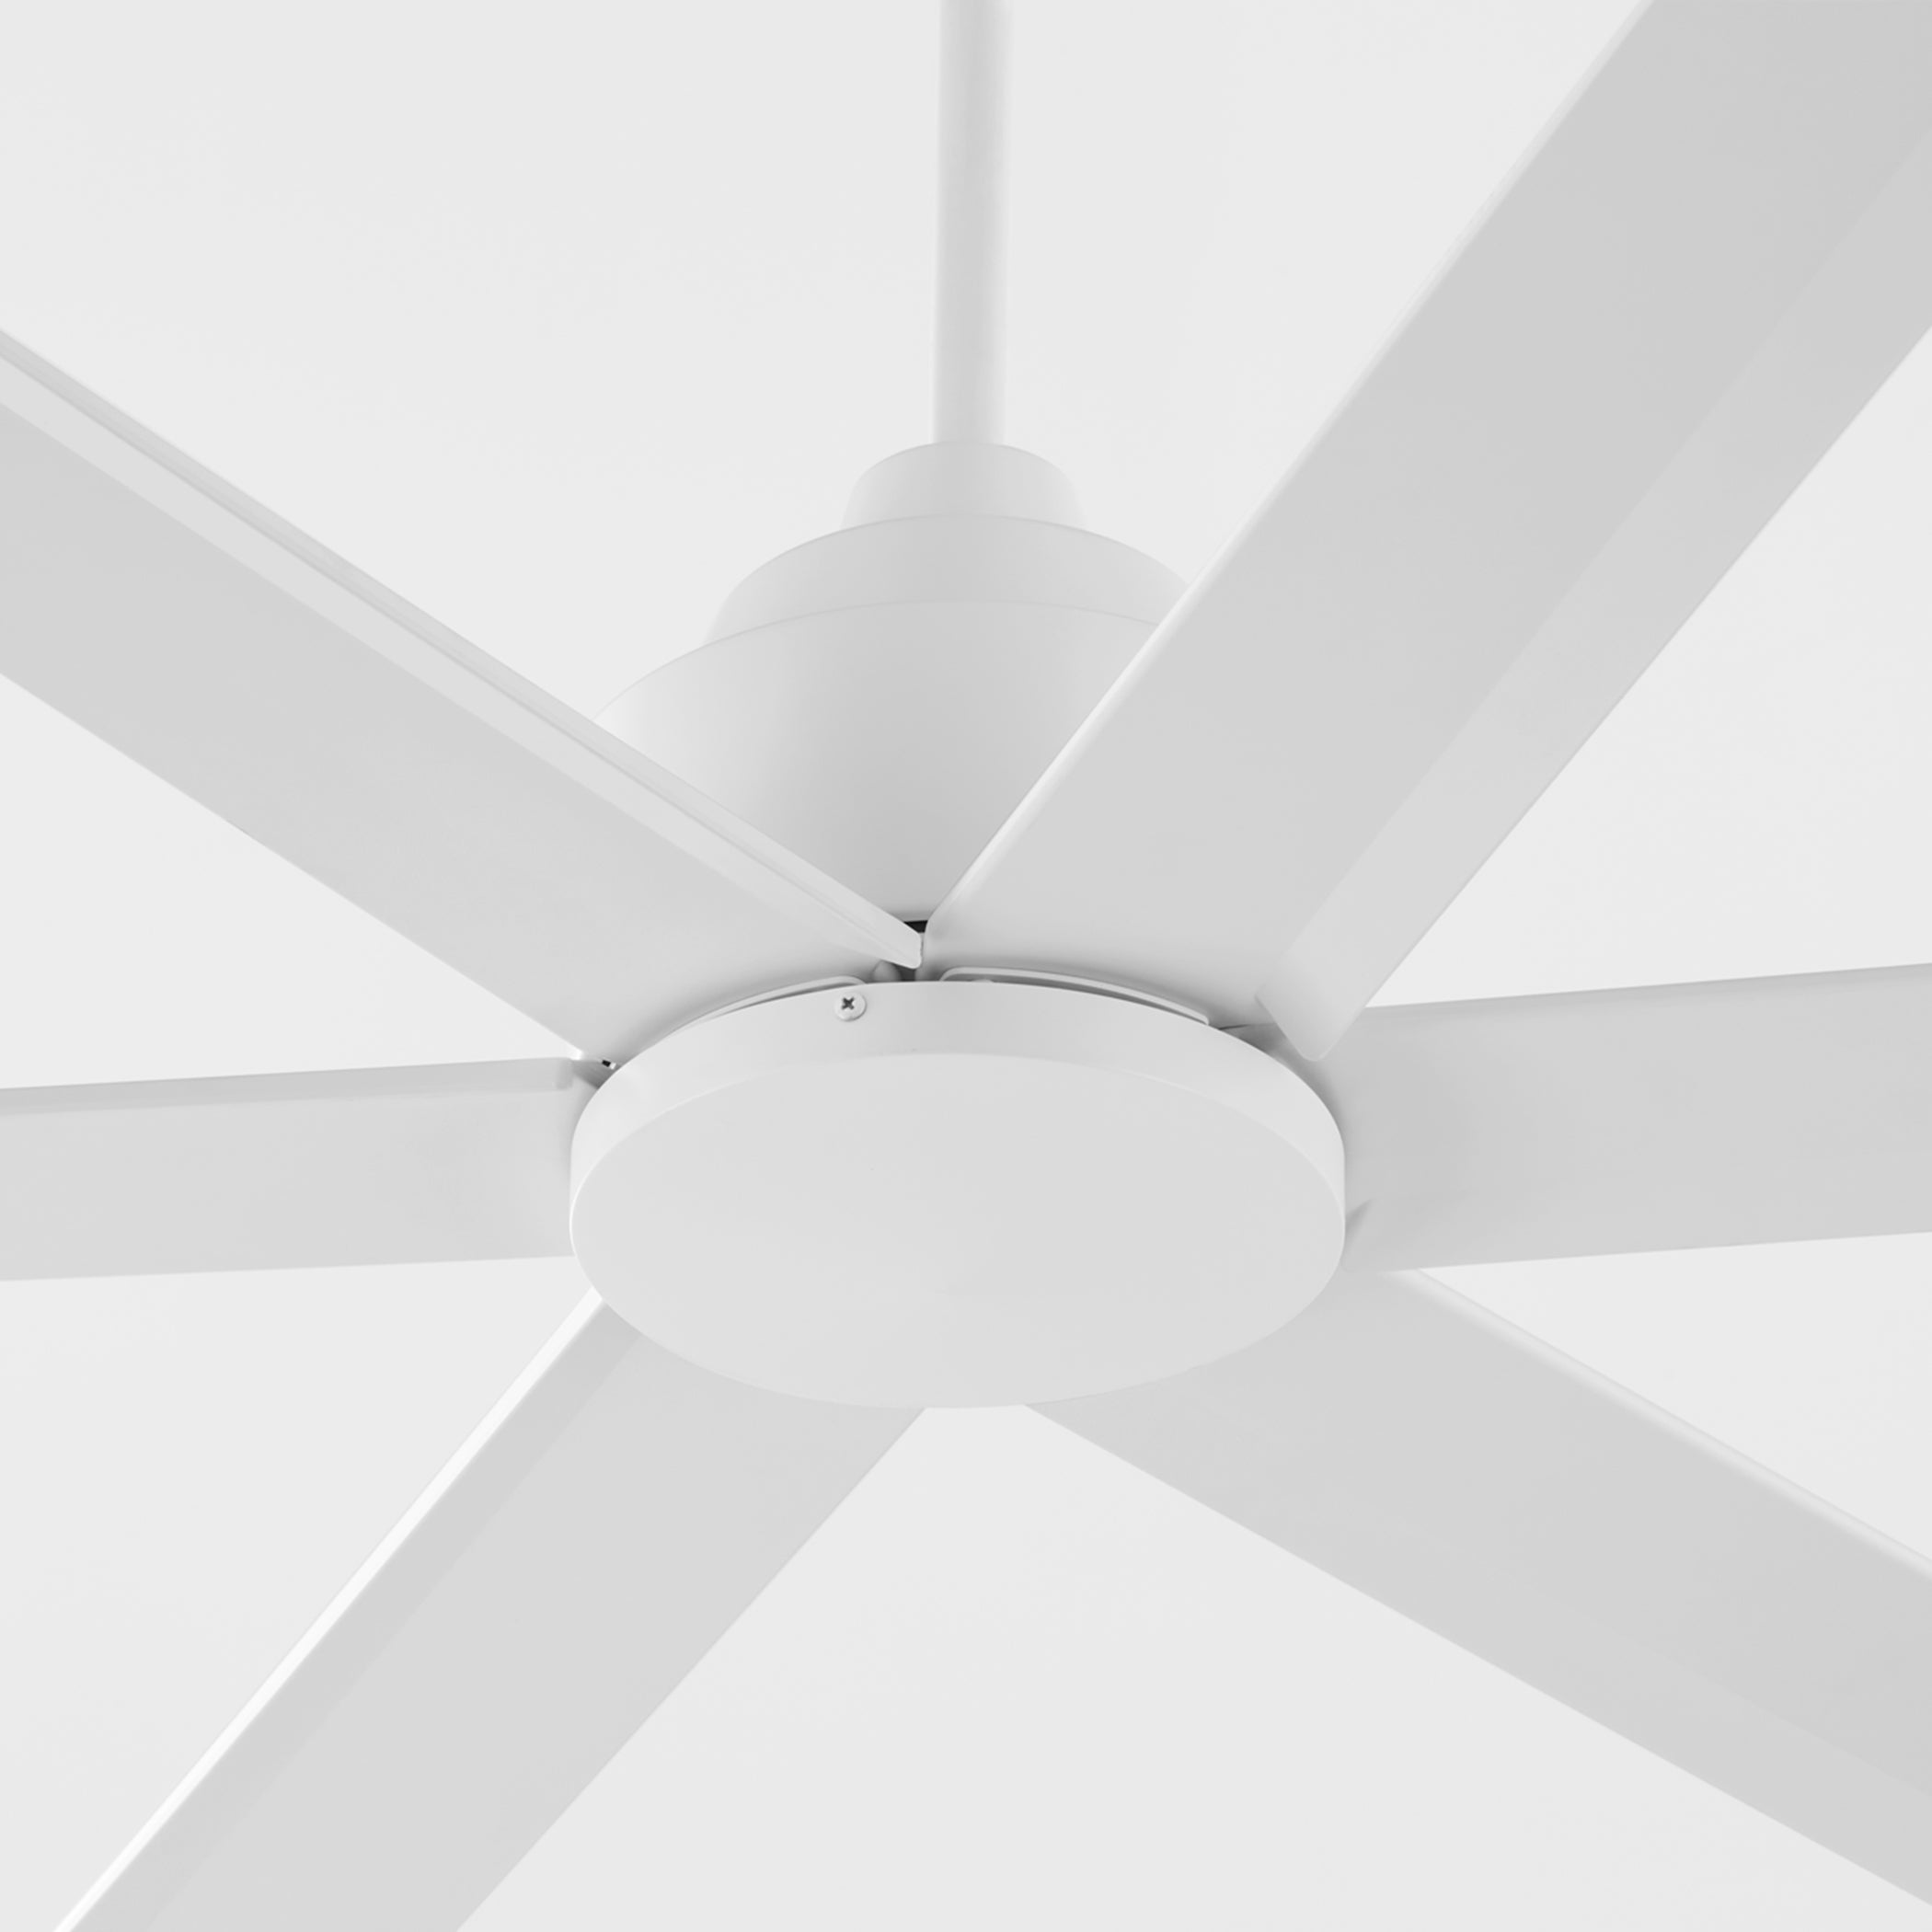 Quorum Titus 20656-8 Ceiling Fan 65 Inch 6 Blades, Damp Listed - Studio White